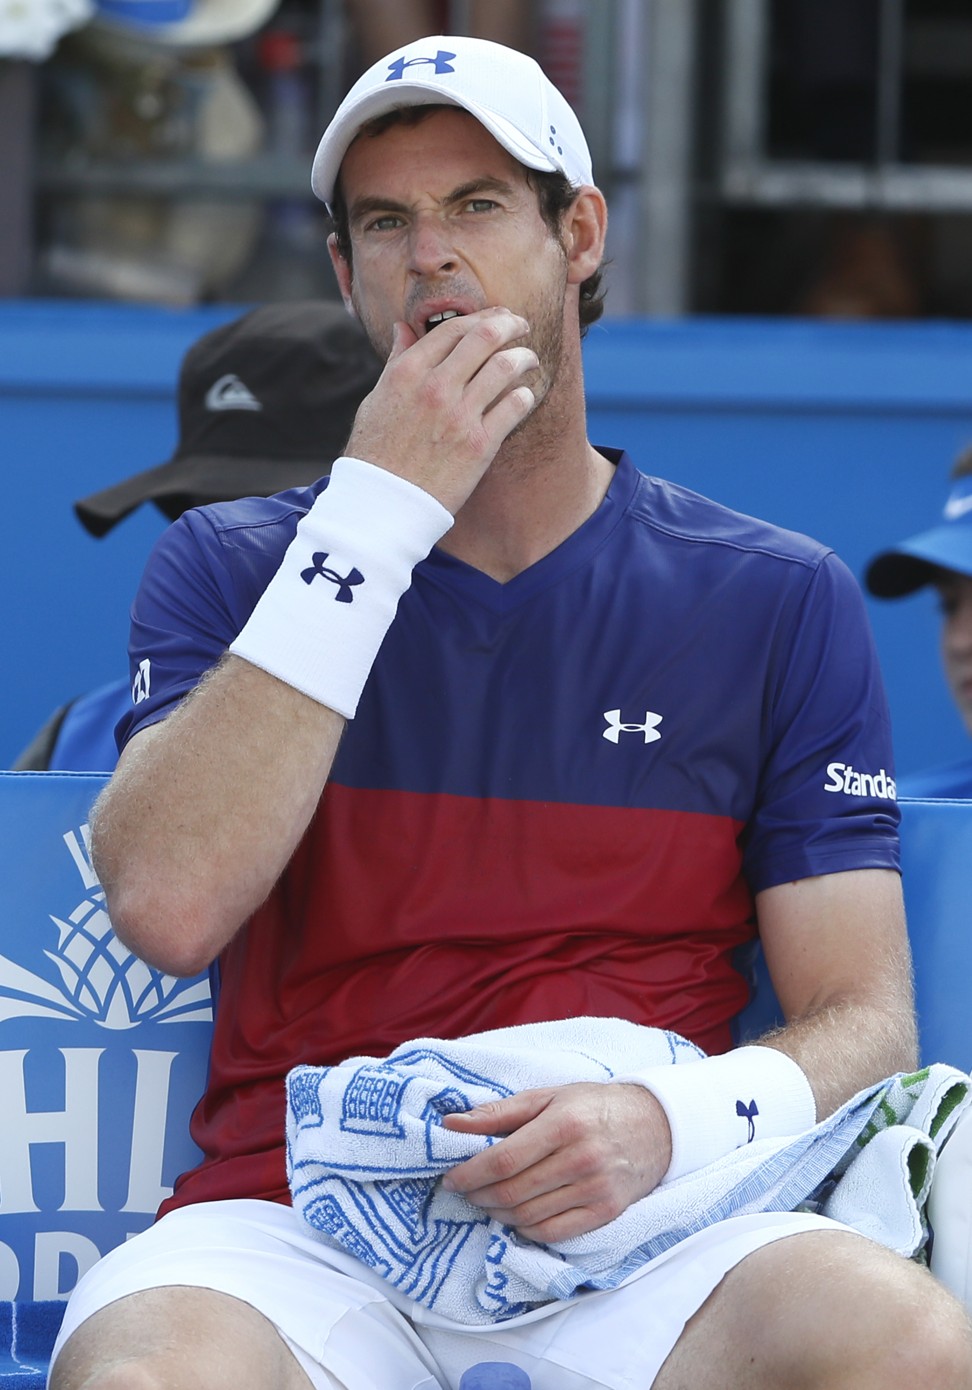 Andy Murray says he has a lot of work to do. Photo: AP